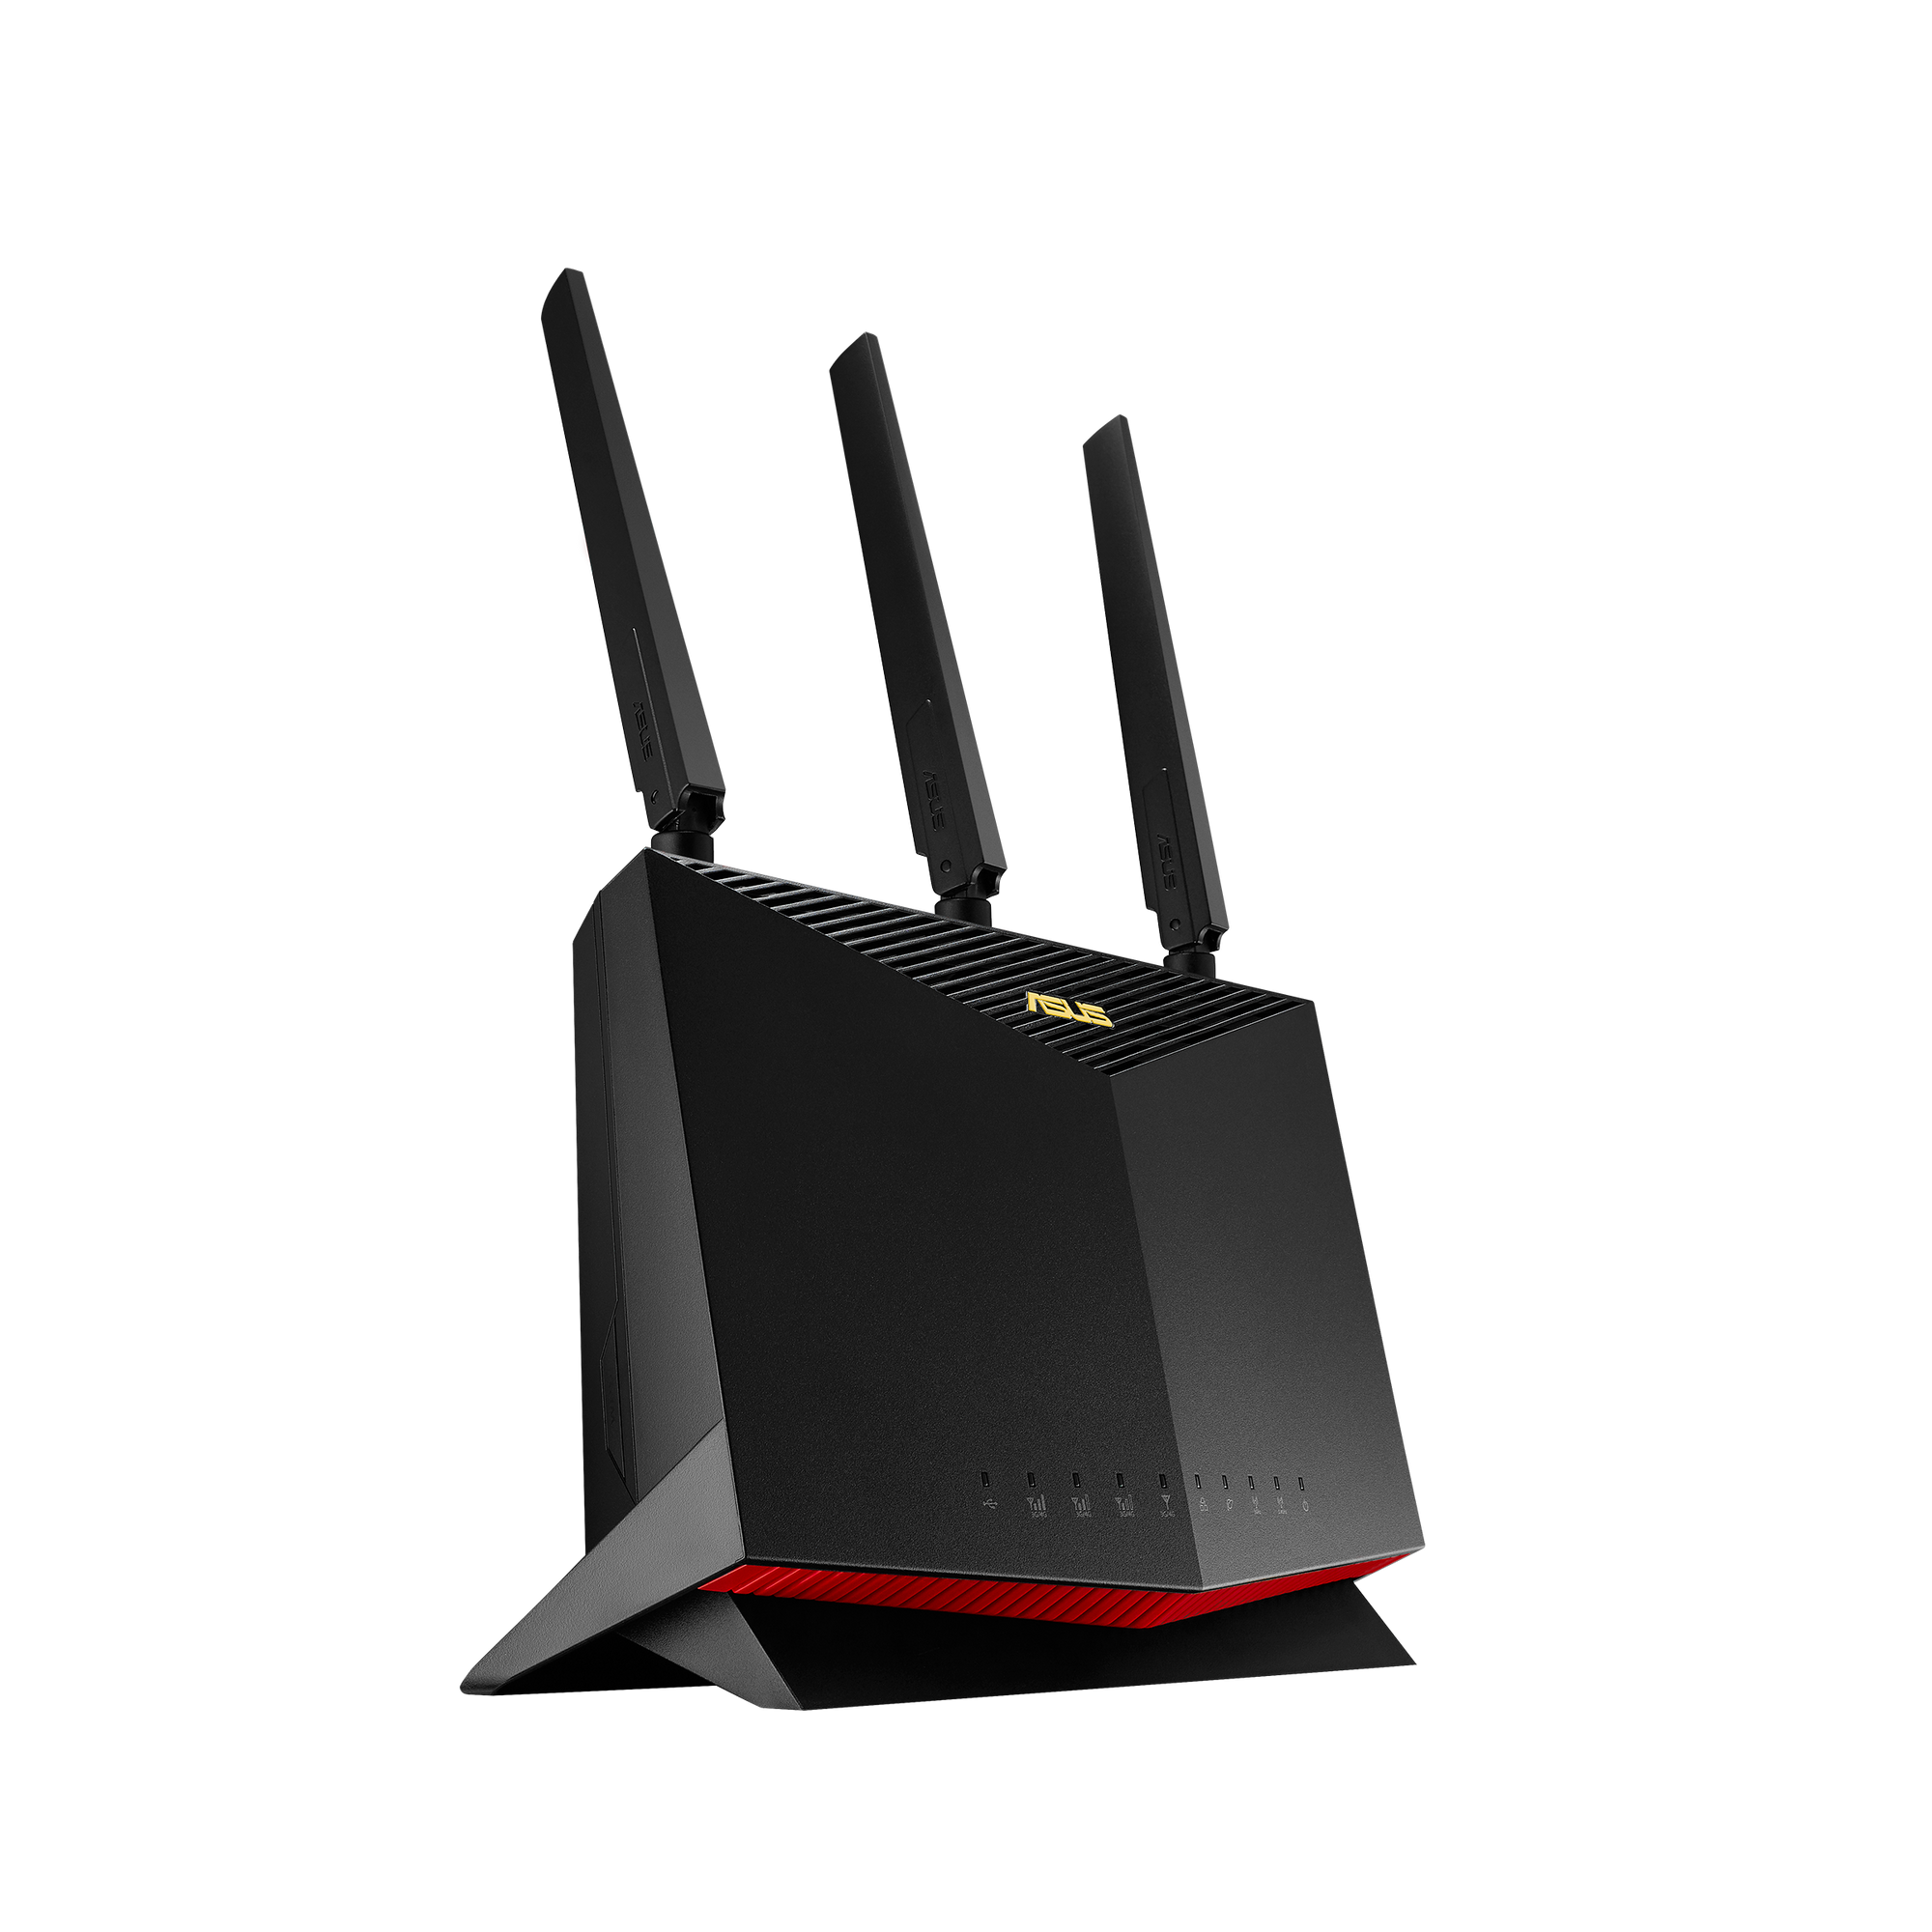 B-WARE ASUS 4G-AC86U Cat. 12 600 Mbit/s Dual-Band AC2600 LTE Modem Router  [refurbished] 2